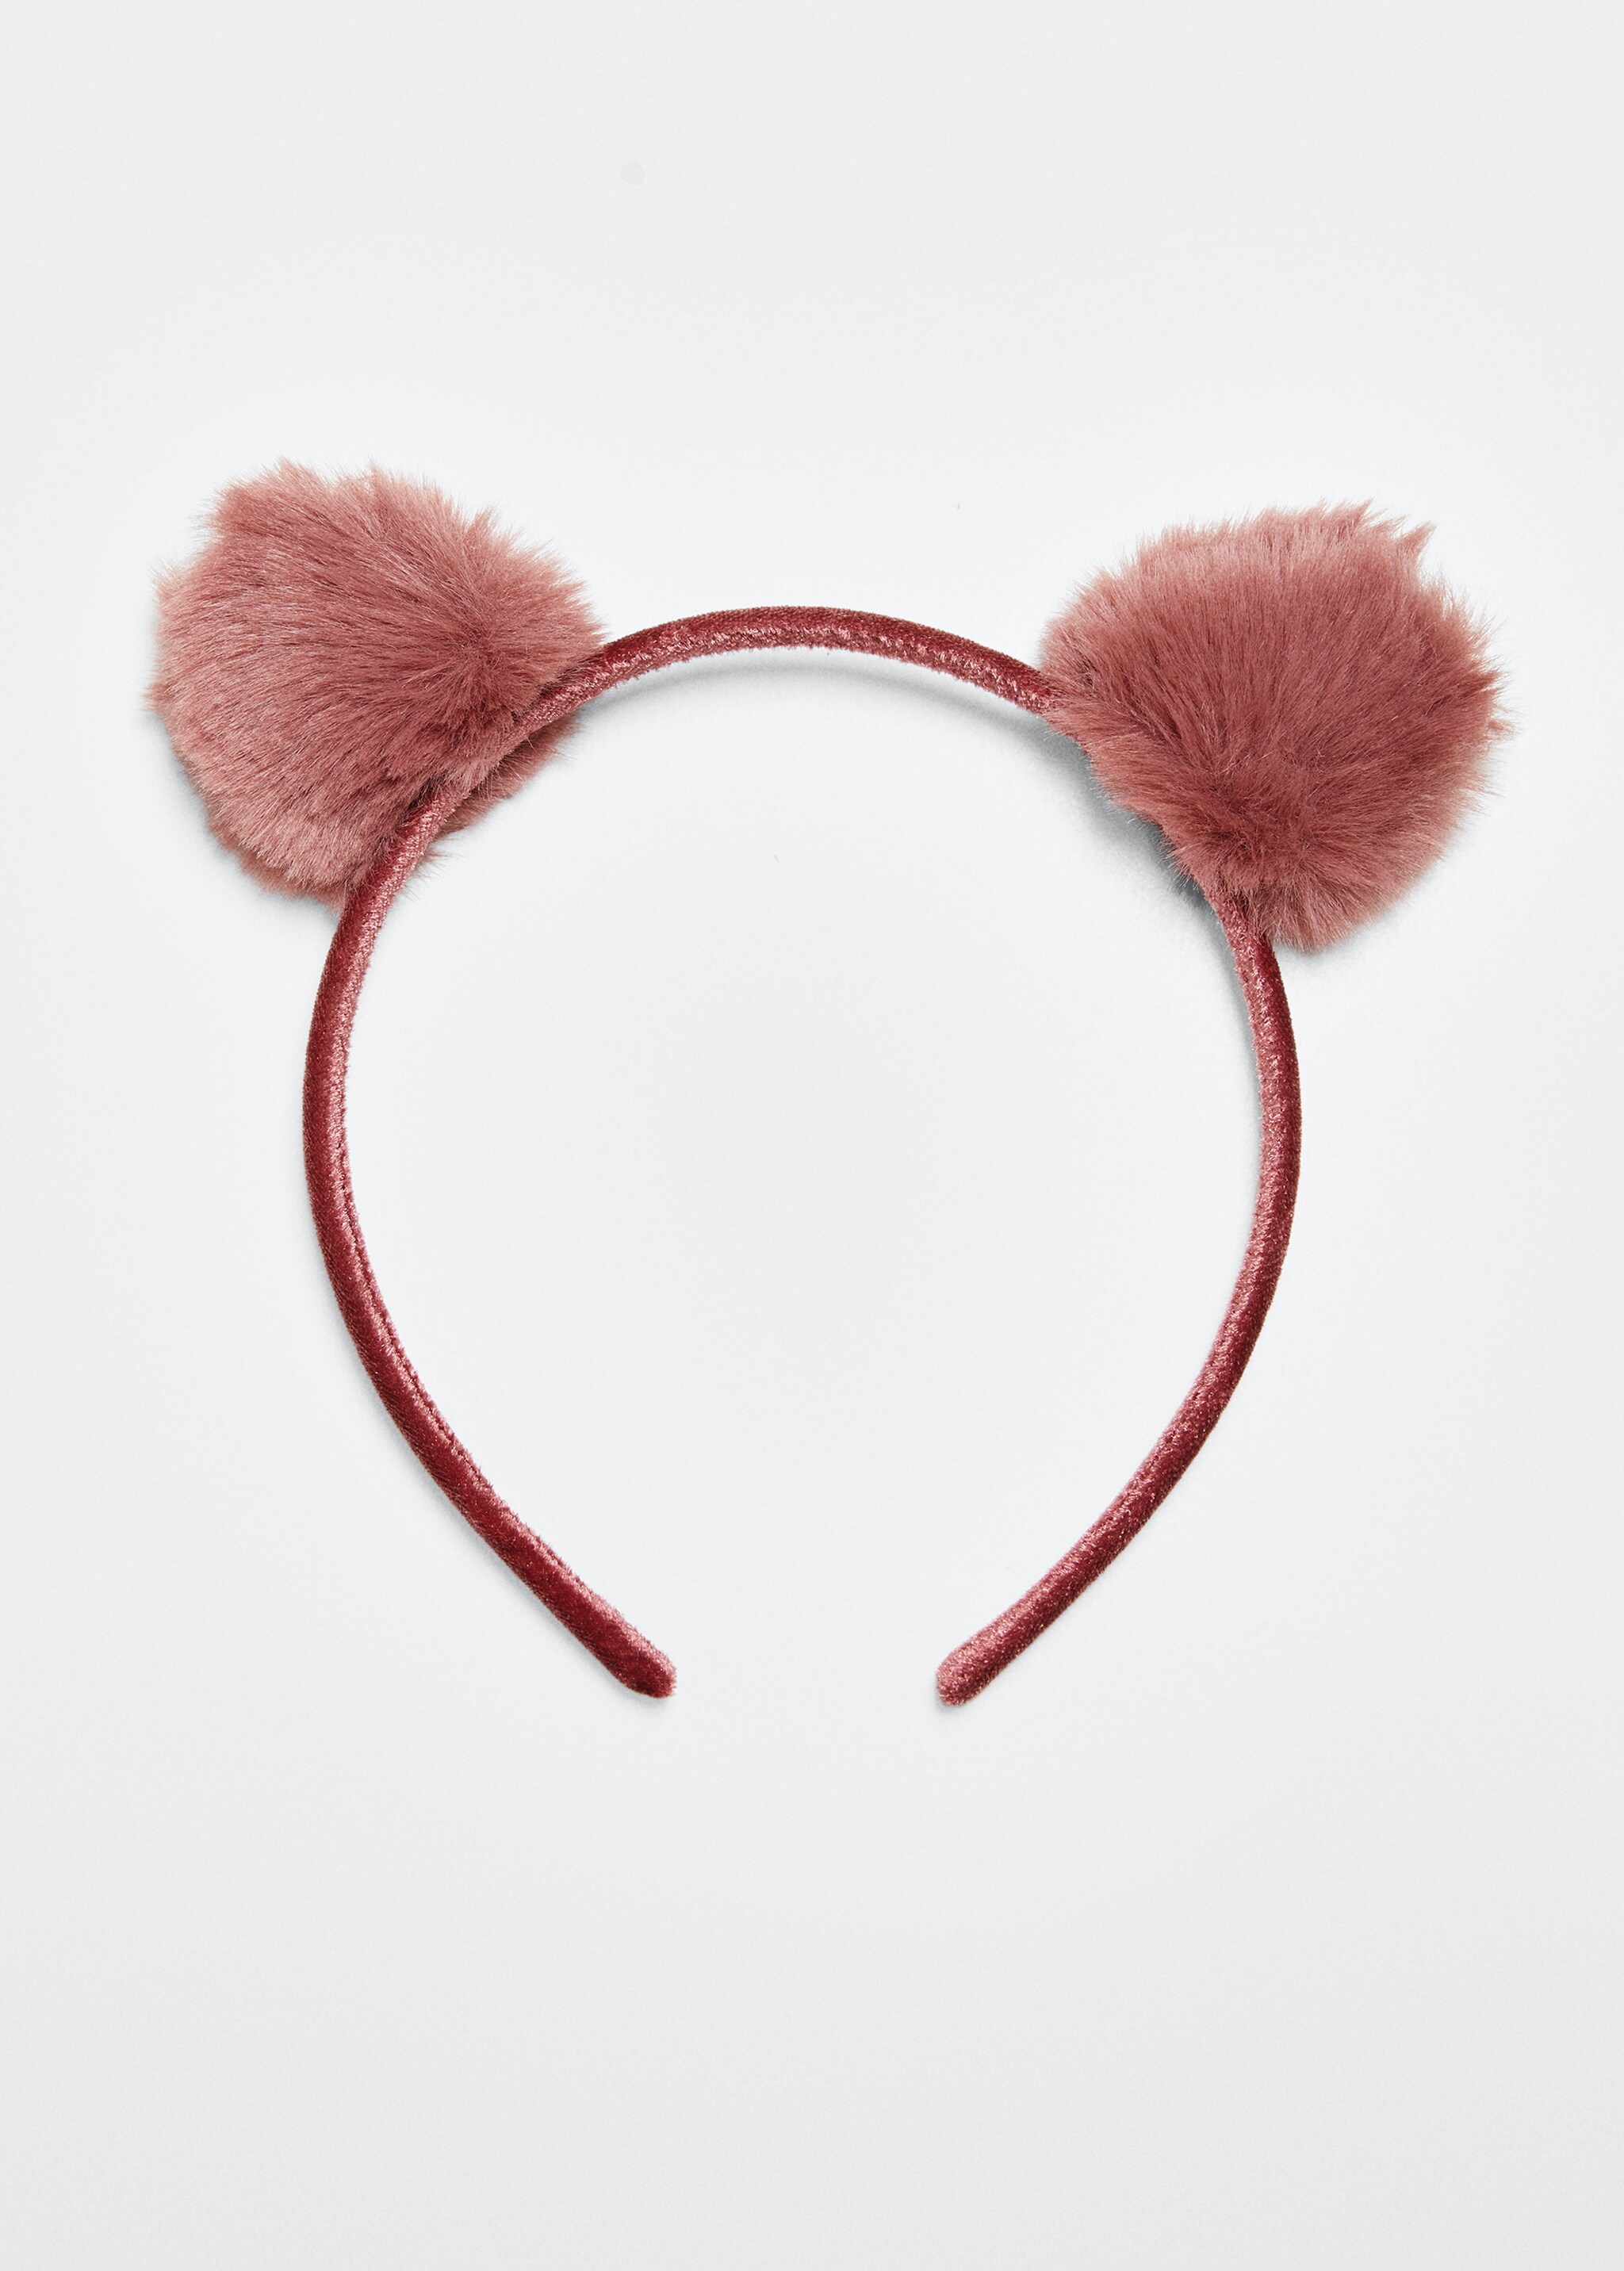 Faux fur ear hairband - Article without model